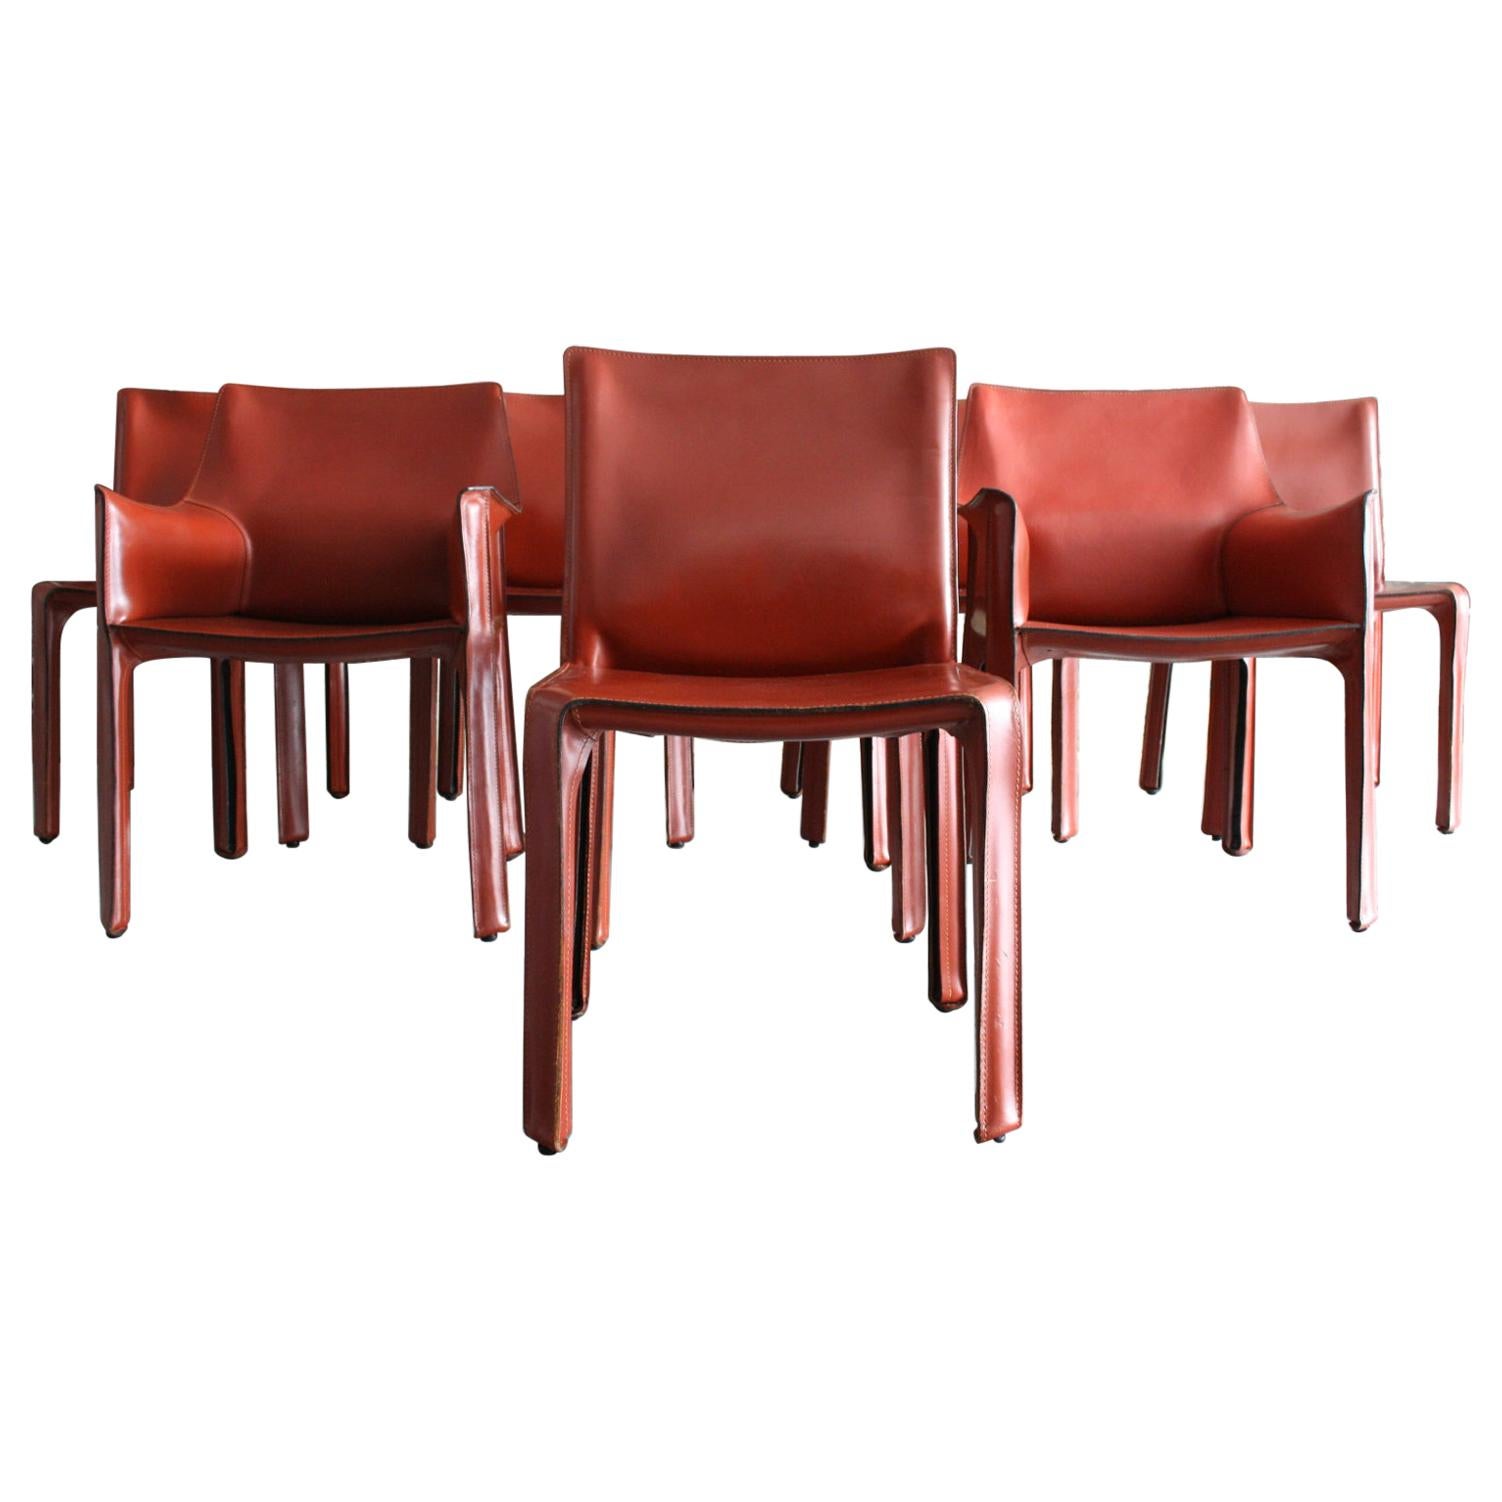 Set of 8 Original Leather 'Cab' Chairs by Mario Bellini for Cassina Italy